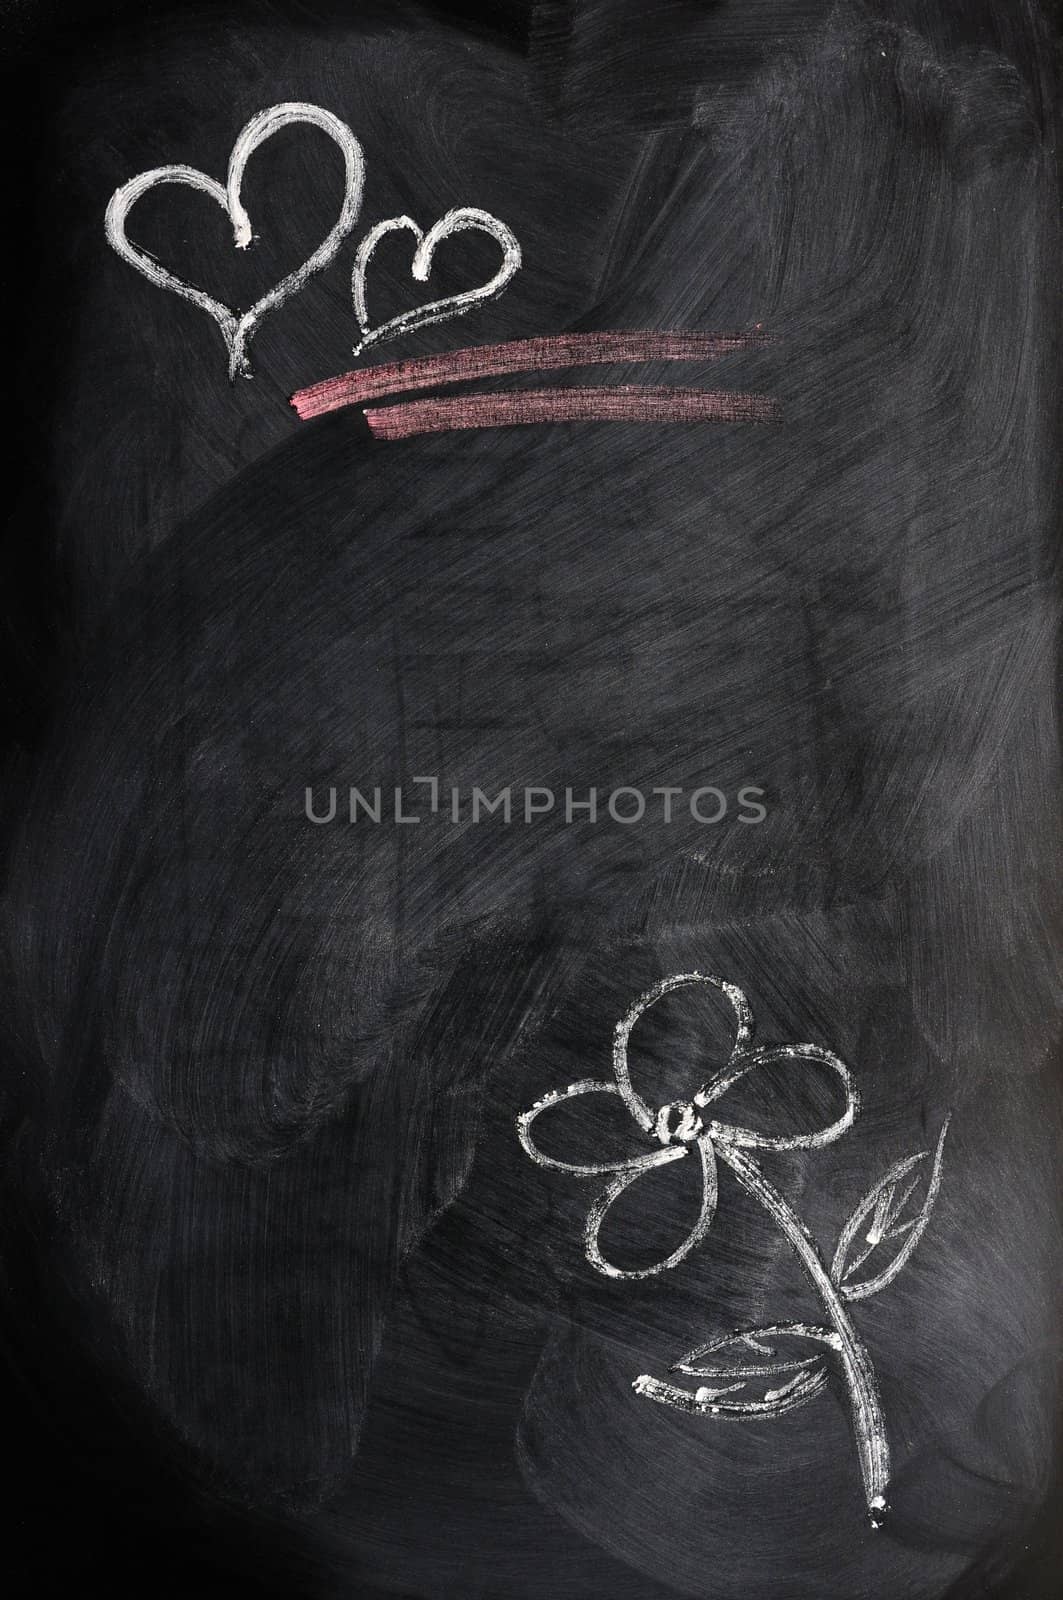 Hearts and flower drawn in chalk on a blackboard